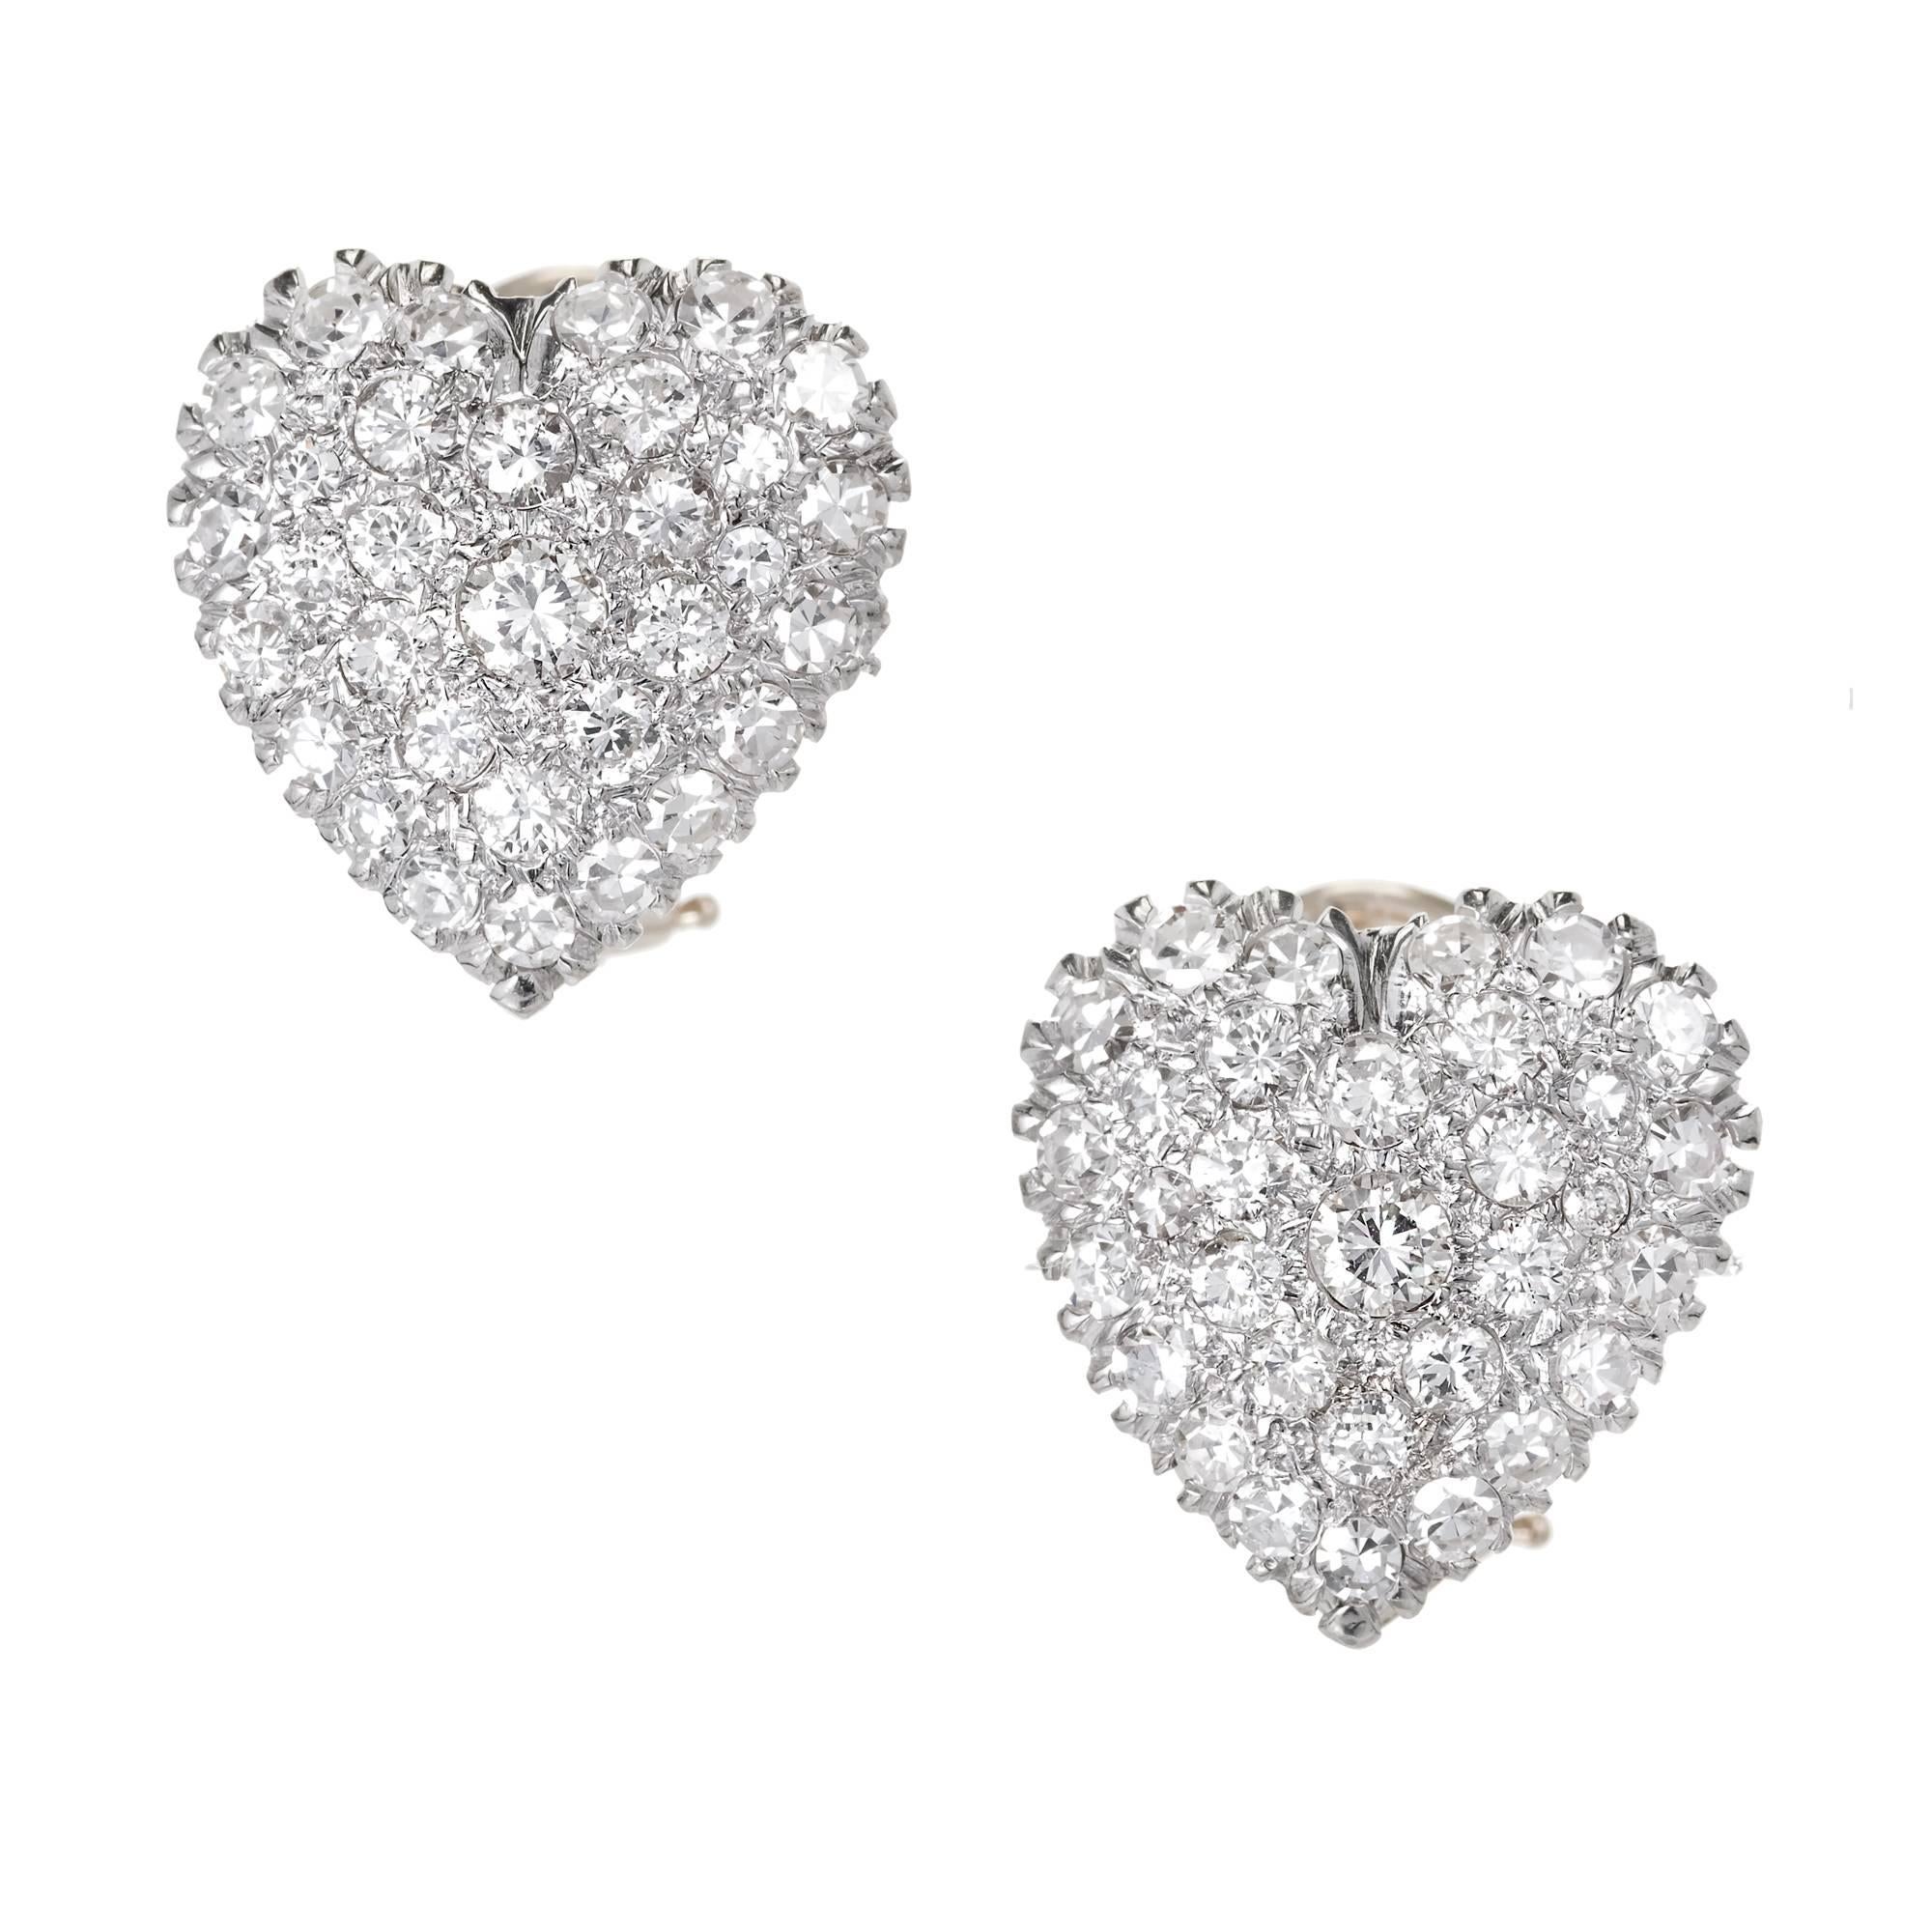 1.85 Carat Pave Diamond Two-Tone Gold Heart Domed Clip Post Earrings